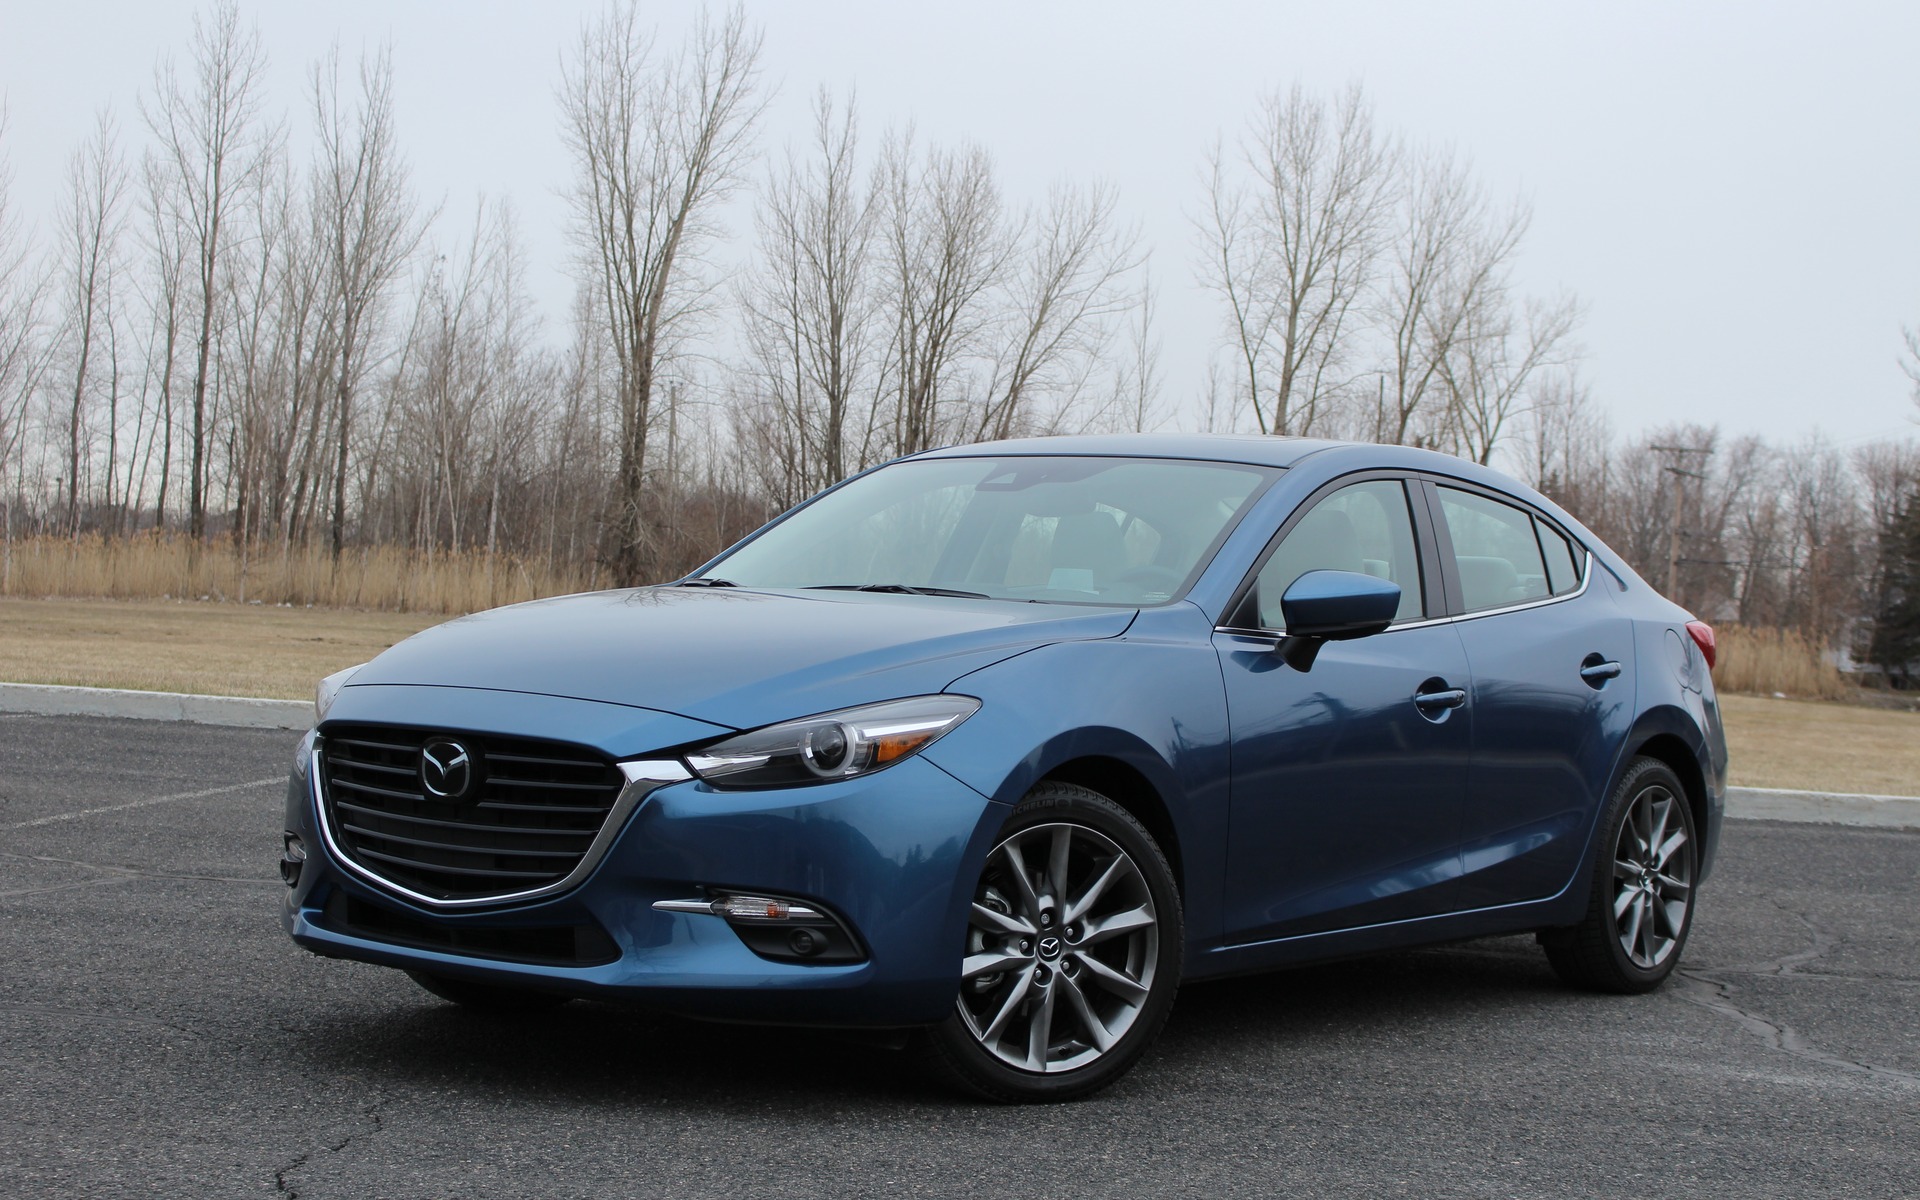 2018 Mazda3: Taking a Bow - The Car Guide